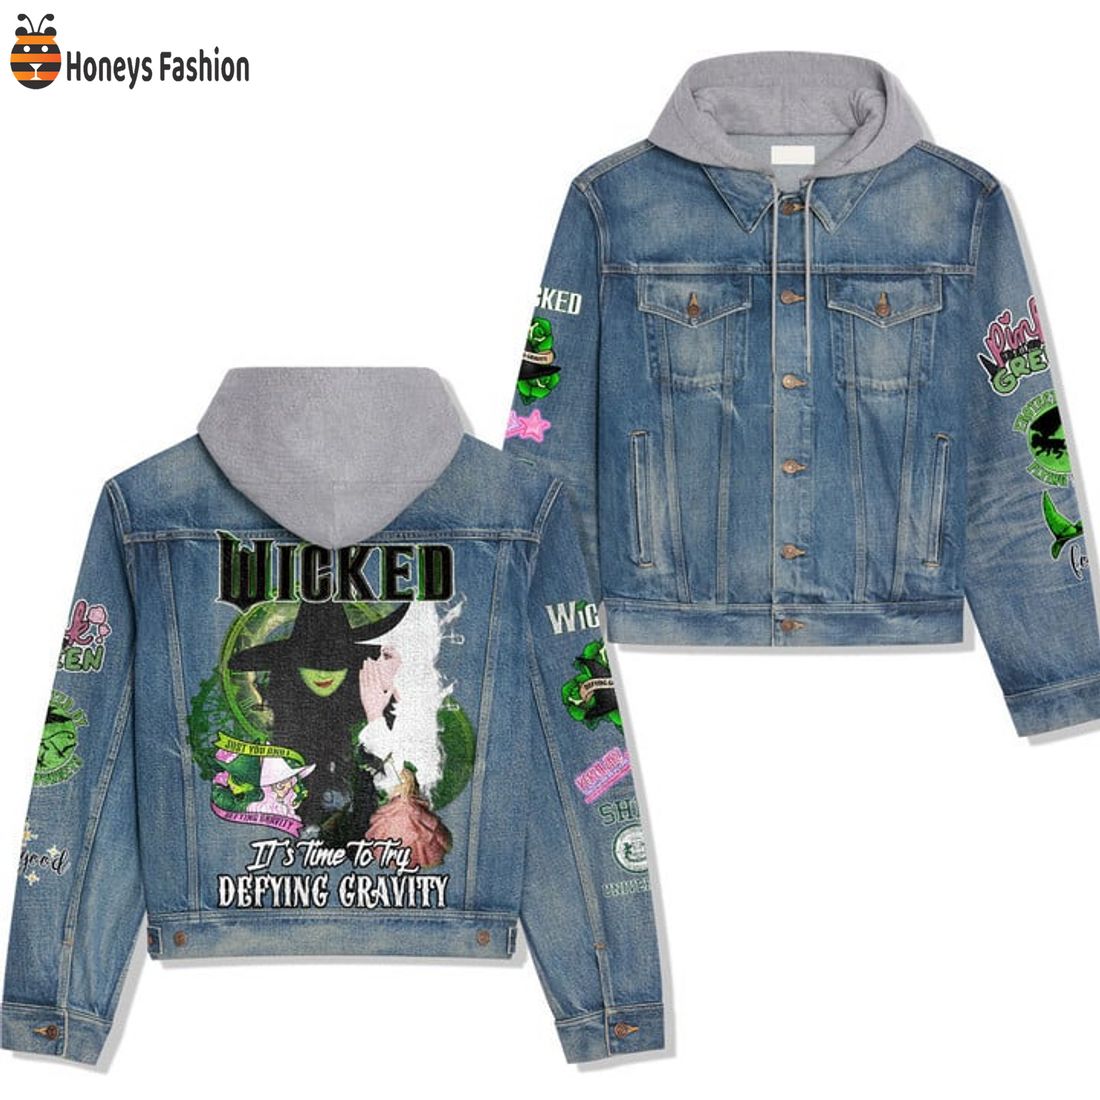 HOT Wicked Broadway Part Two Hooded Denim Jacket